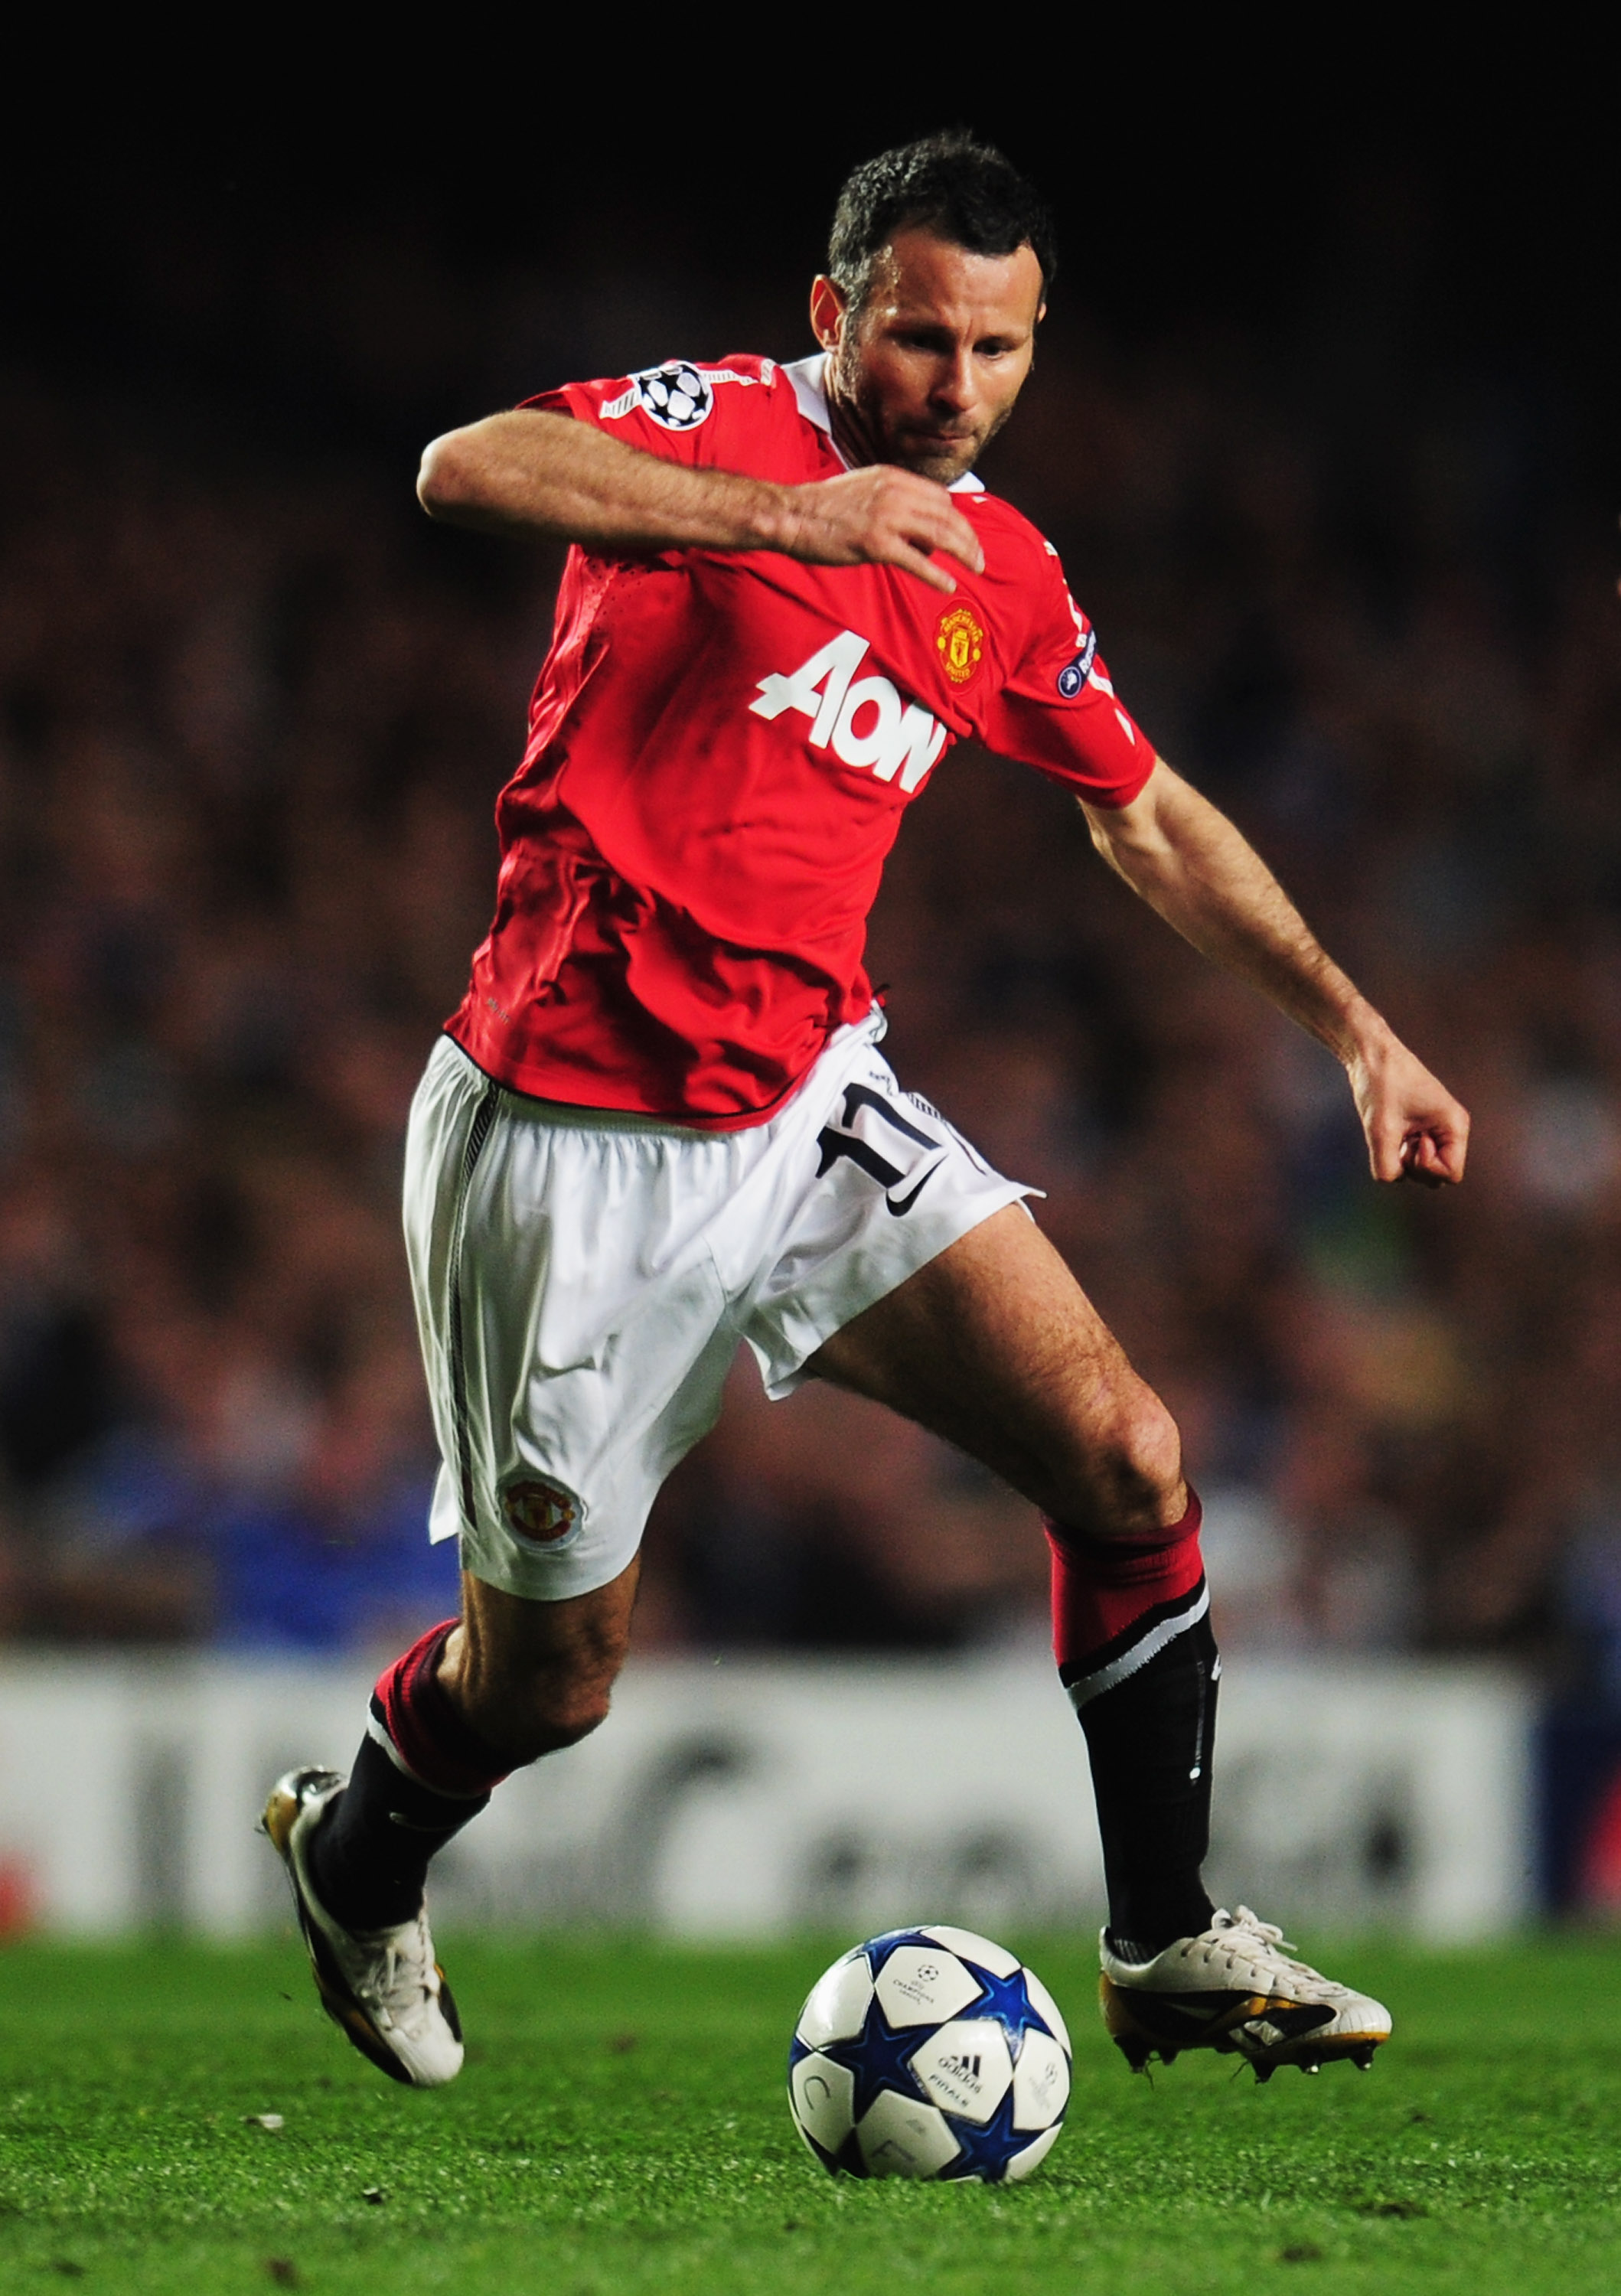 Ryan Giggs on the ball against Chelsea